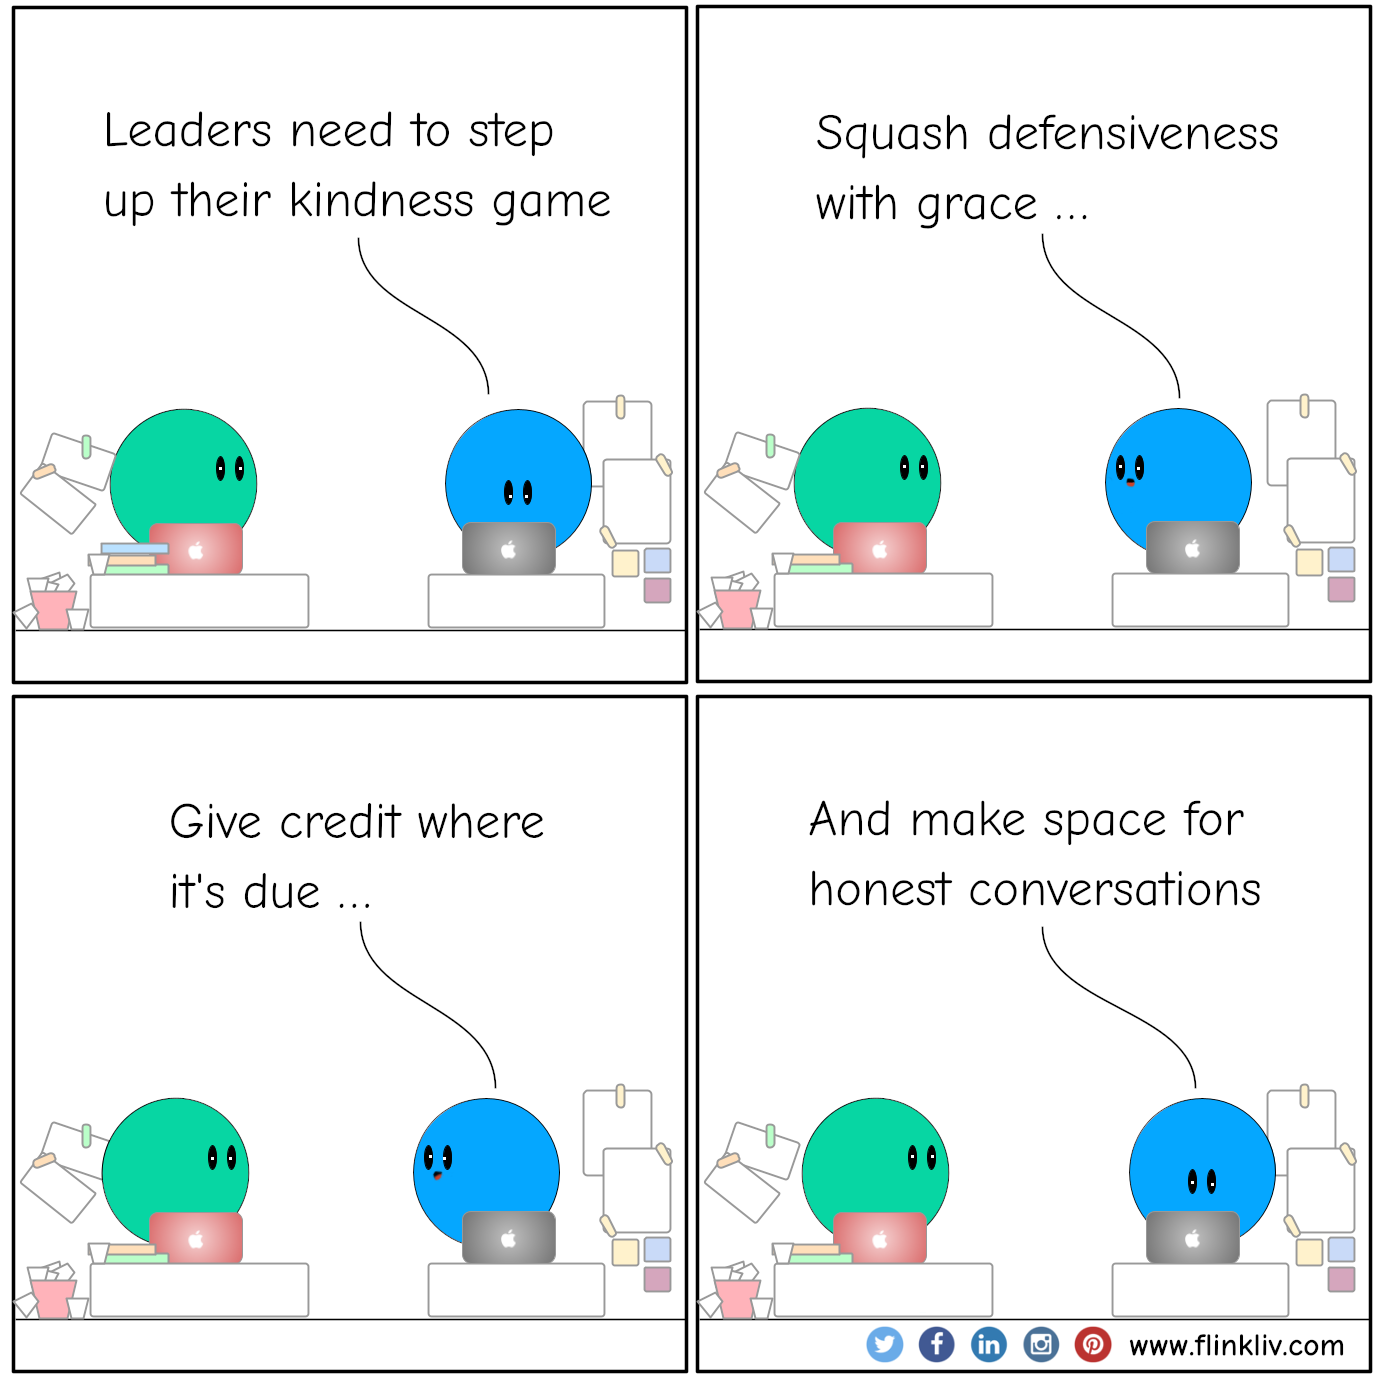 Conversation between A and B about the power of communicating with kindness. B: Leaders need to step up their kindness game. Squash defensiveness with grace, give credit where it's due, and make space for honest conversations. By flinkliv.com